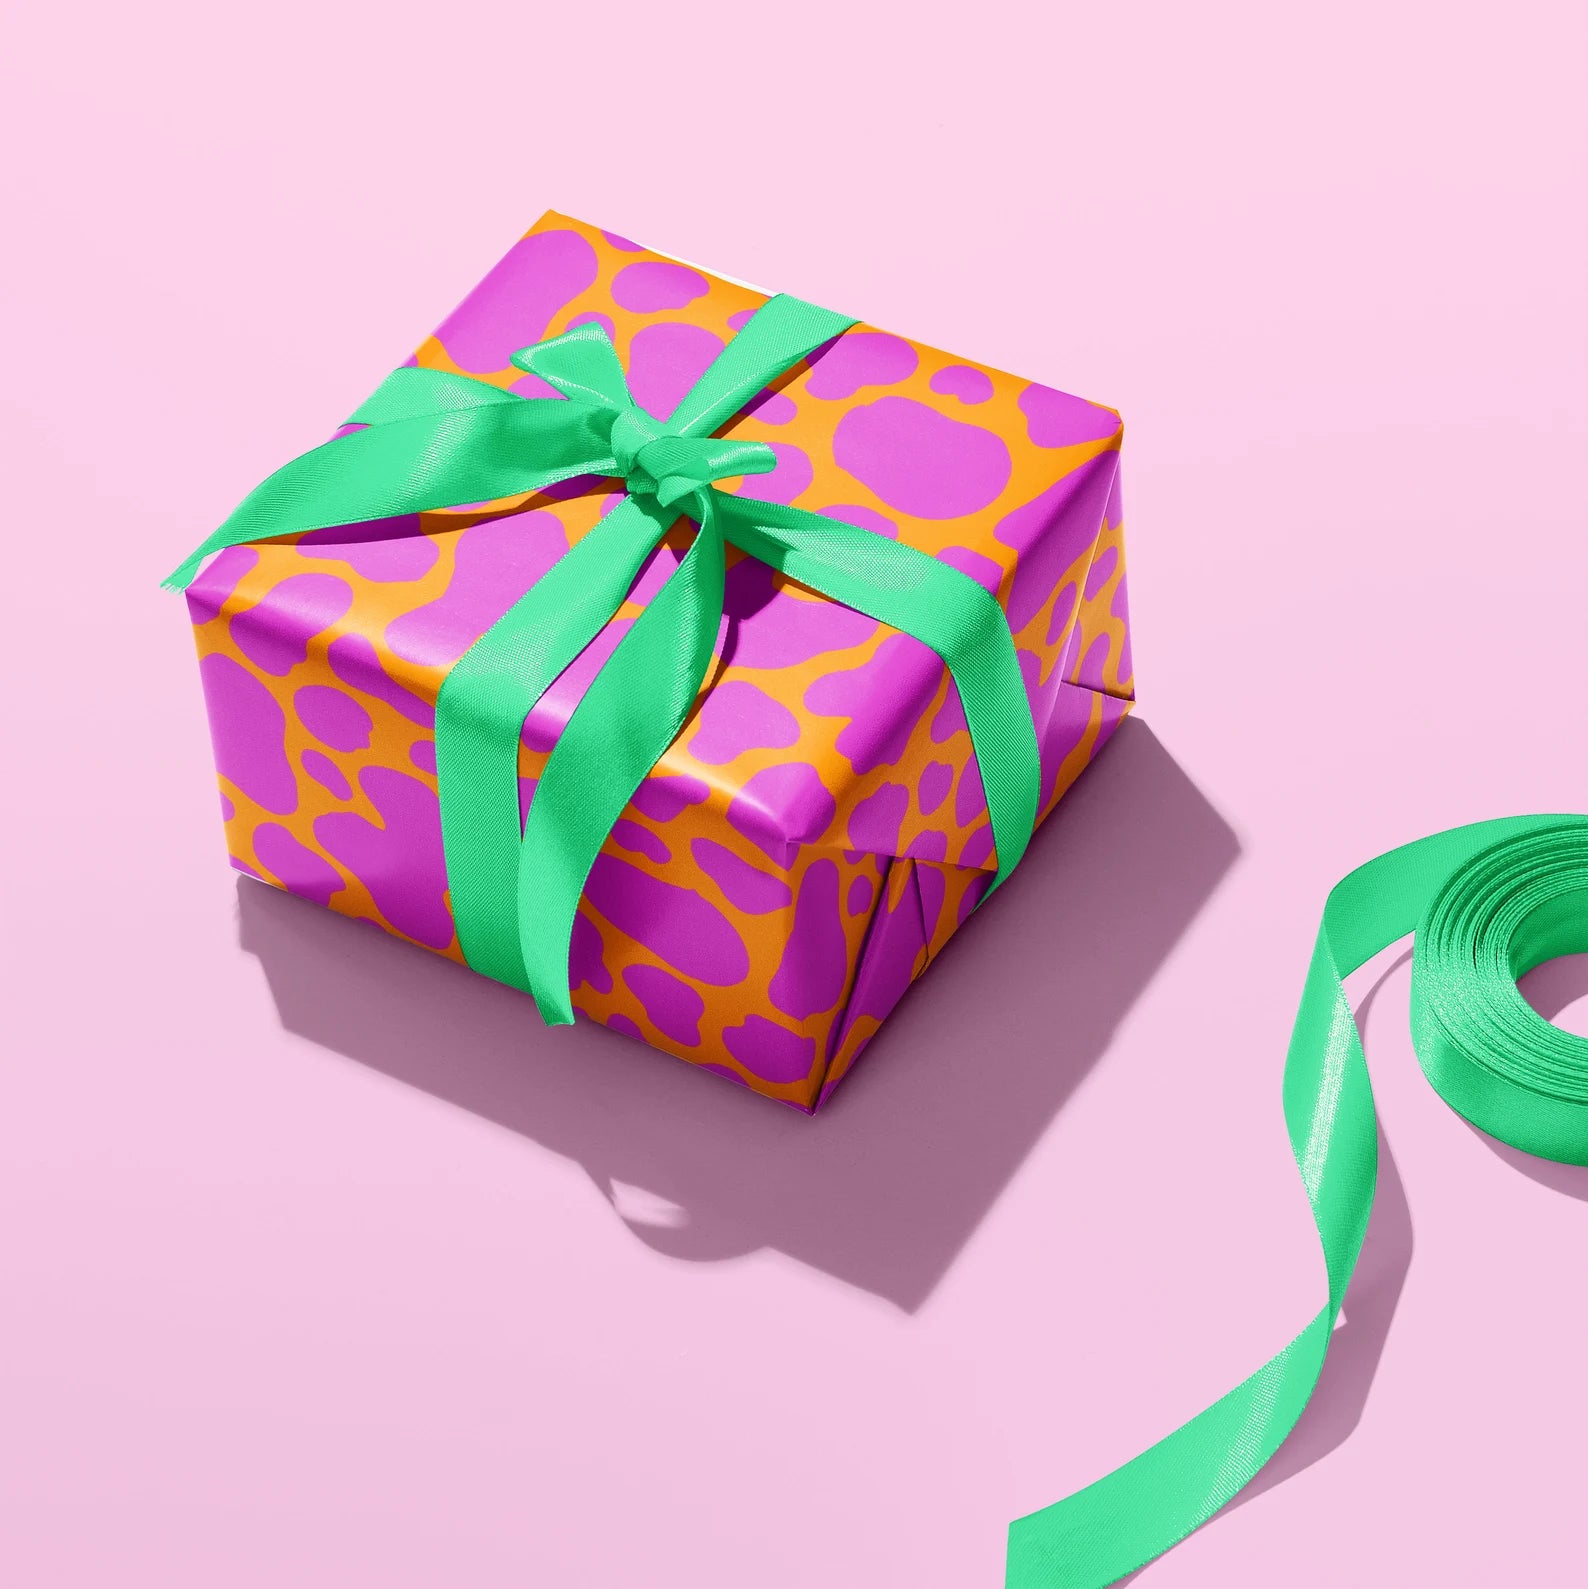 Pink Cow Print Wrapping Paper